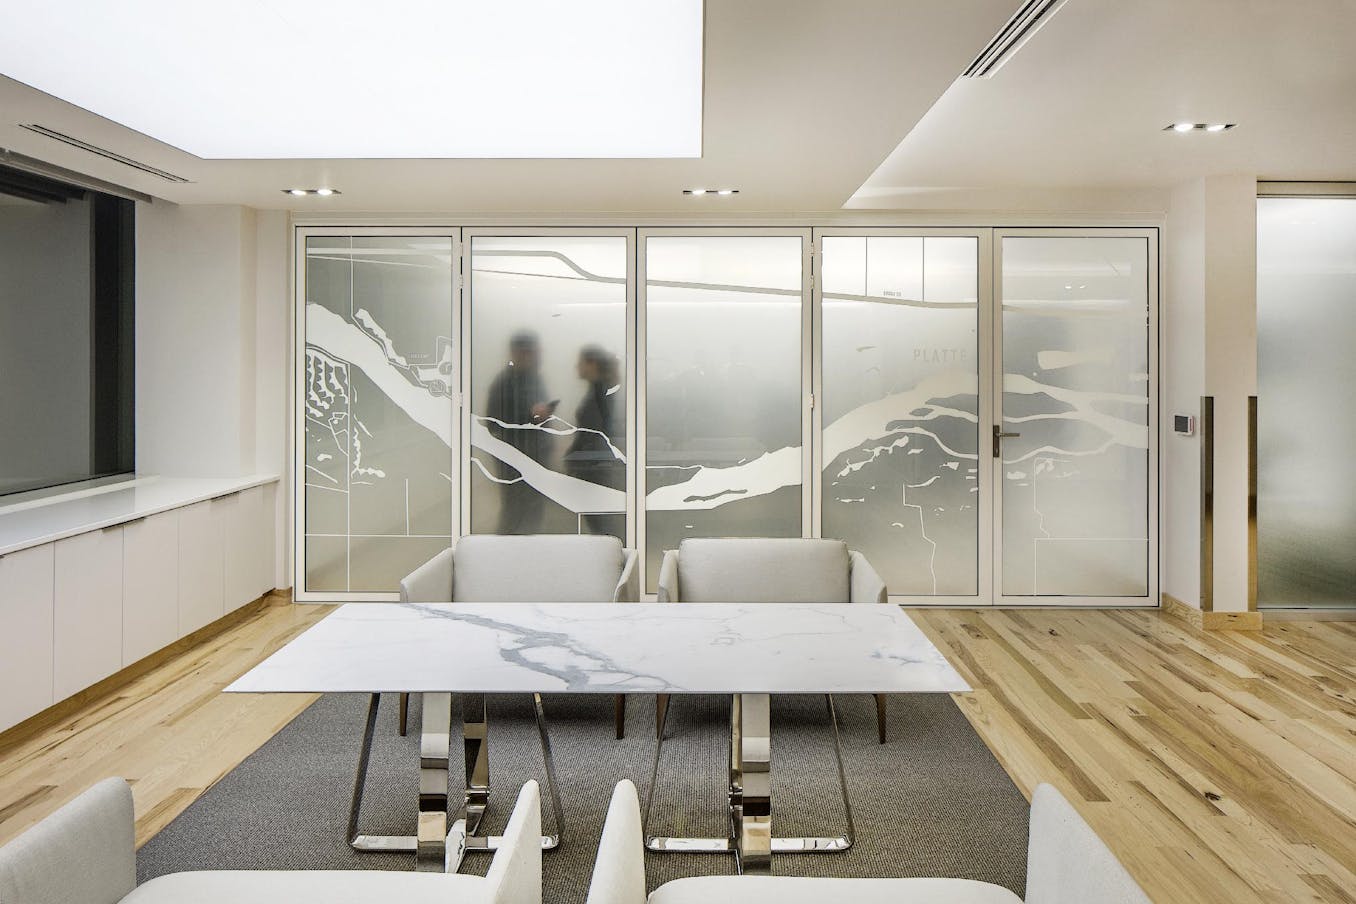 Law office with frosted glass walls